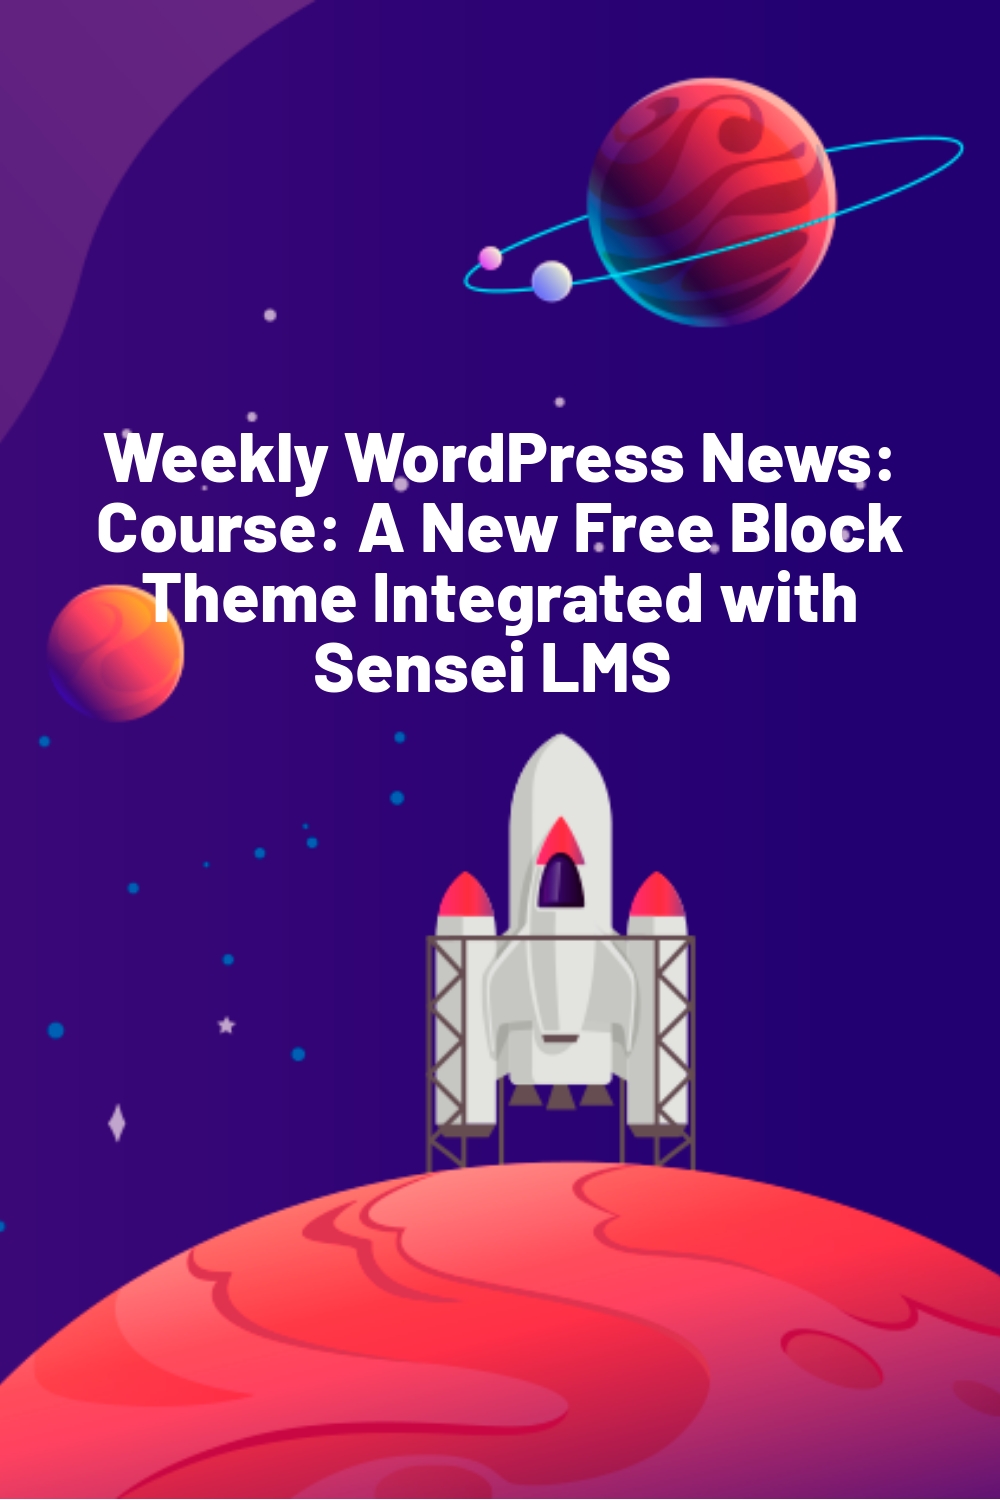 Weekly WordPress News: Course: A New Free Block Theme Integrated with Sensei LMS 